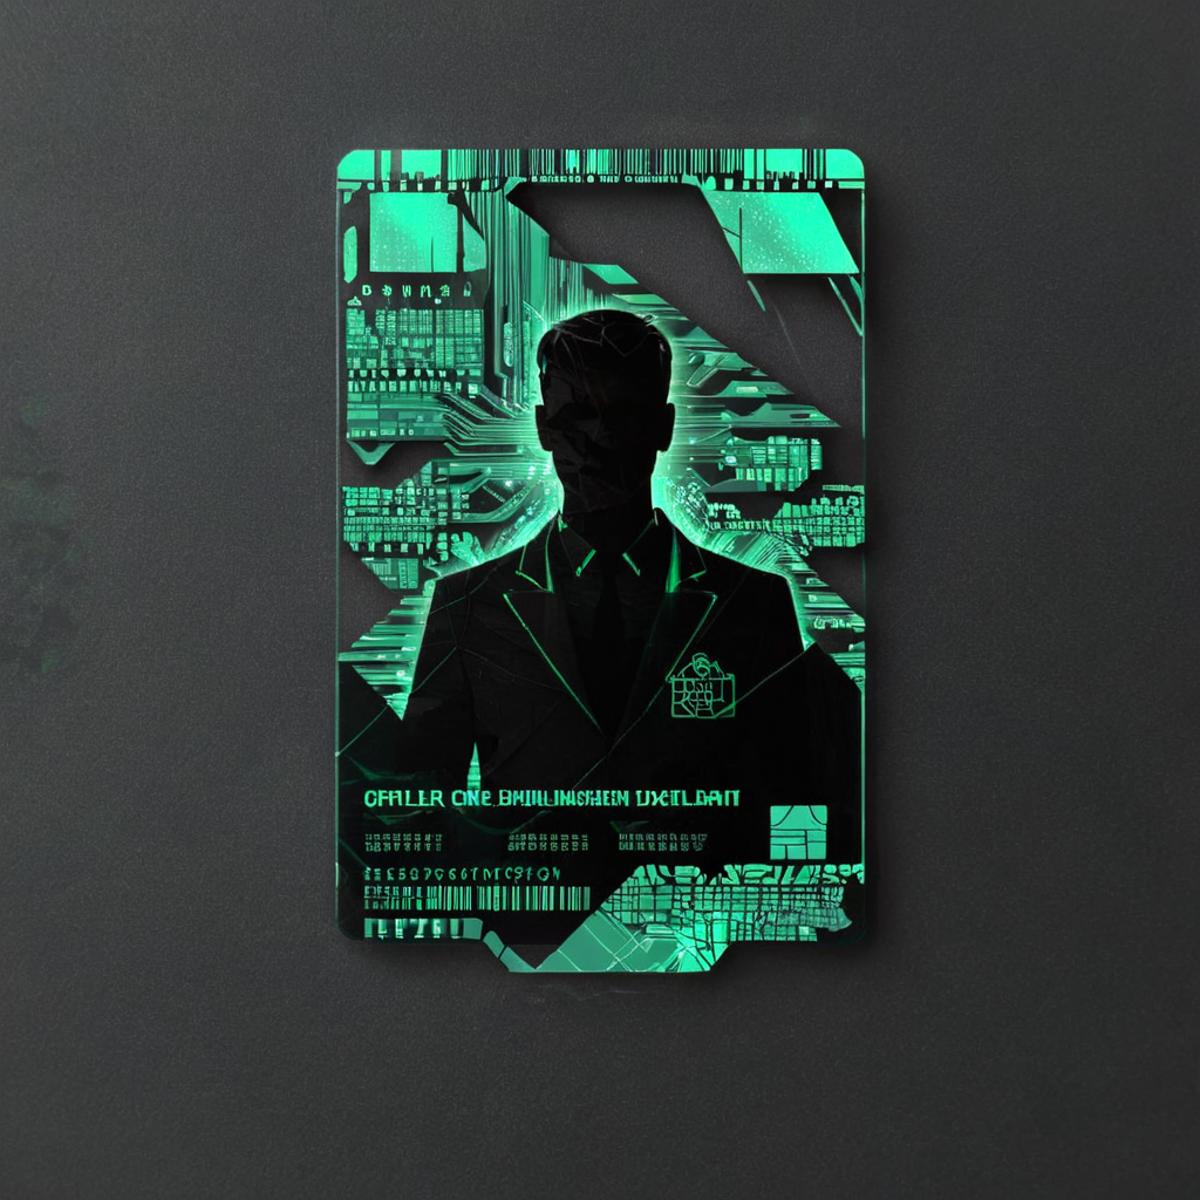 Cyber ID image by Catz